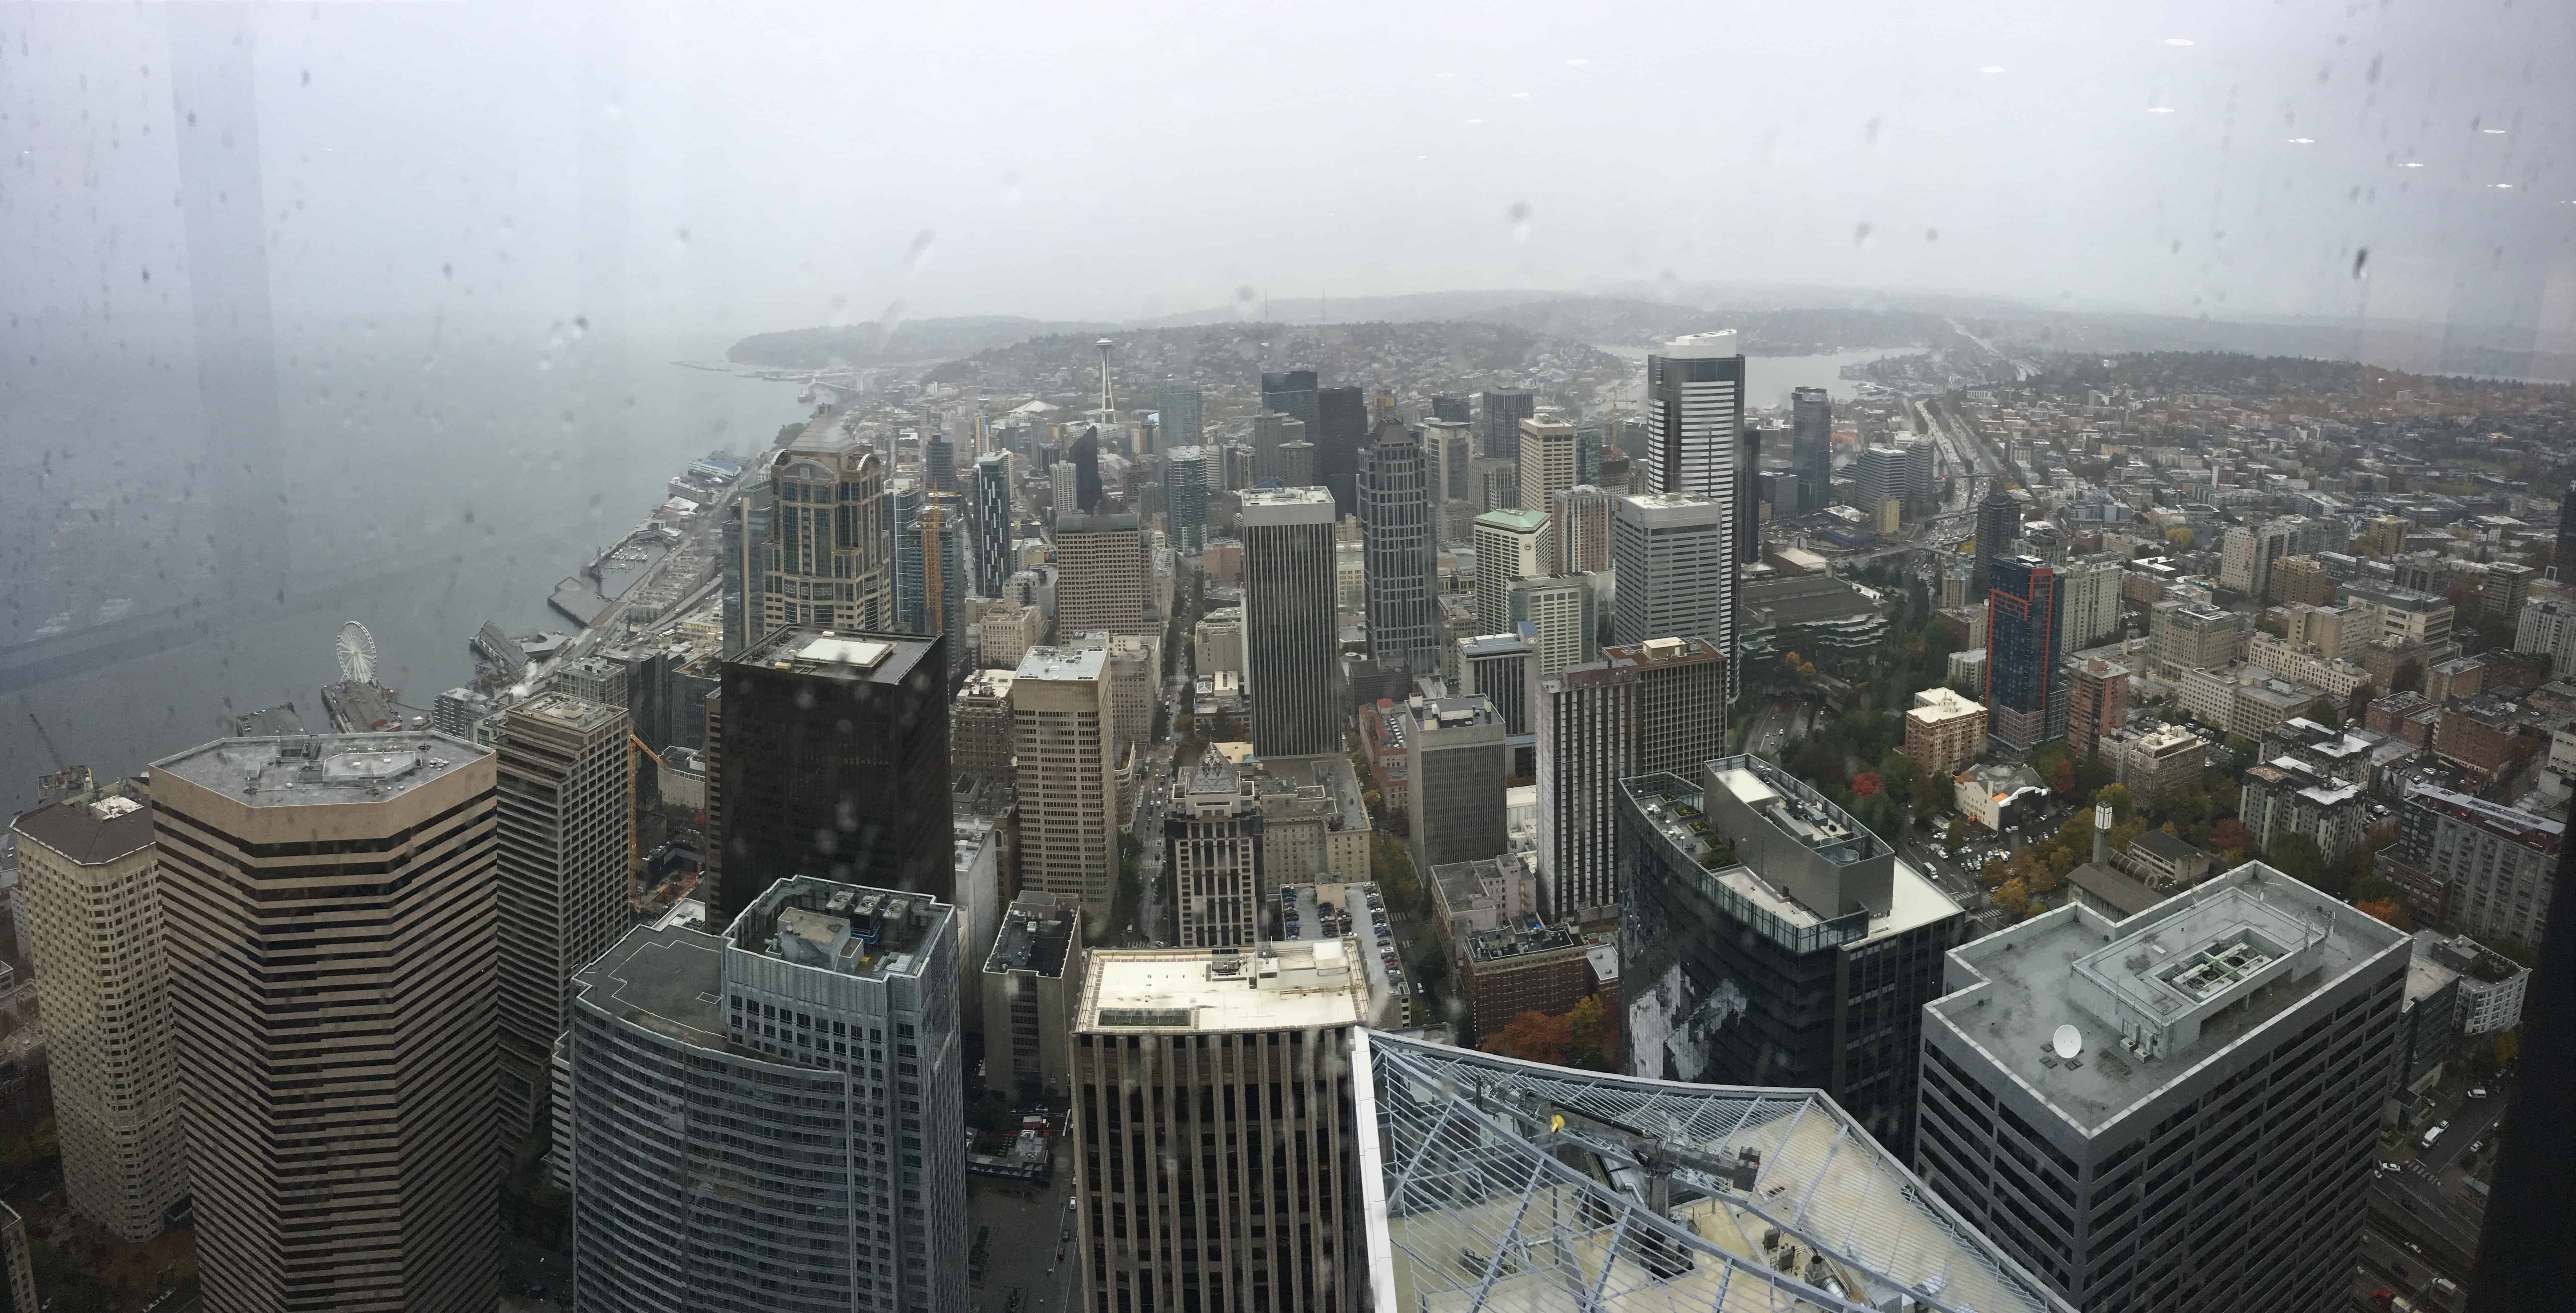 The view from Columbia Center in Seattle, Washington